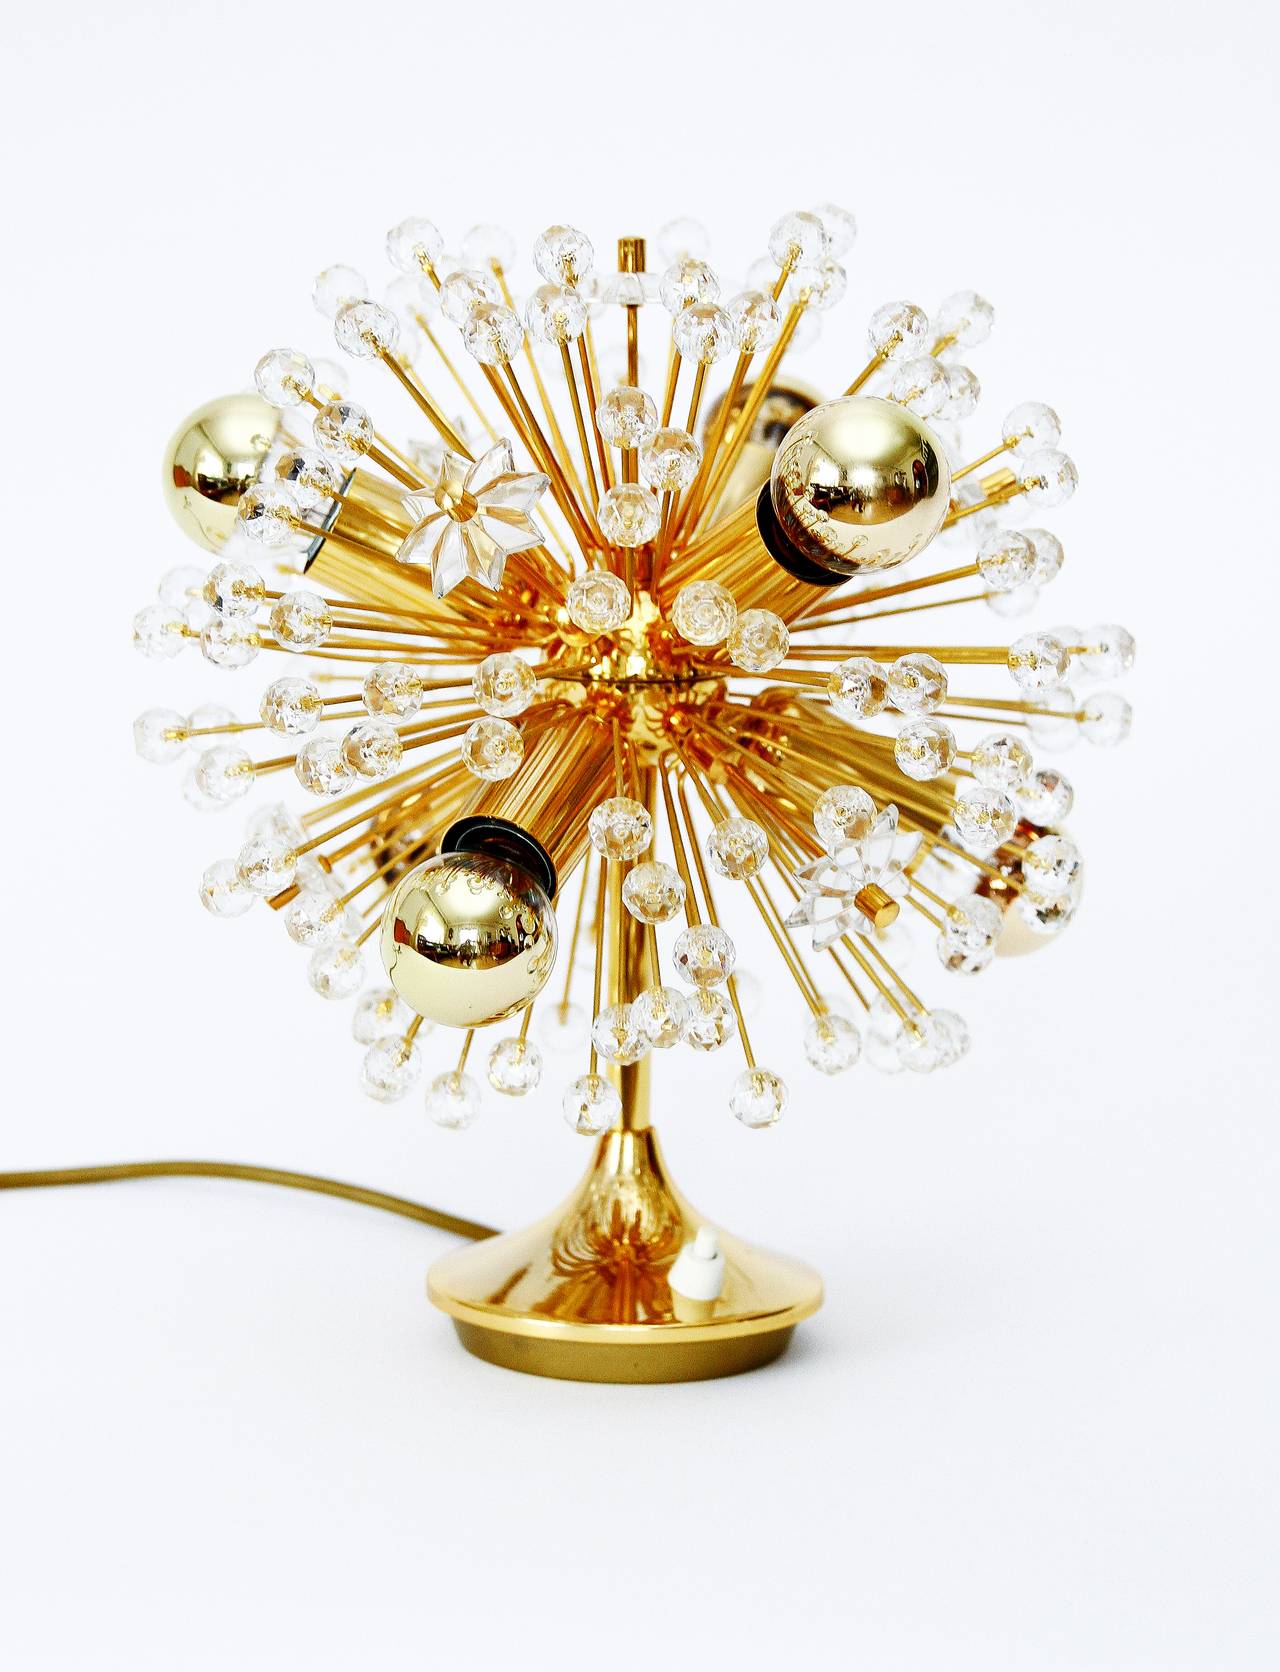 Beautiful pair of sputnik table lamps designed by Emil Stejnar and executed by Rupert Nikoll Vienna. Very exclusive 24 carat gold-plated version with a lot of Austrian crystal balls and stars. Excellent condition.

The price is per item. They are